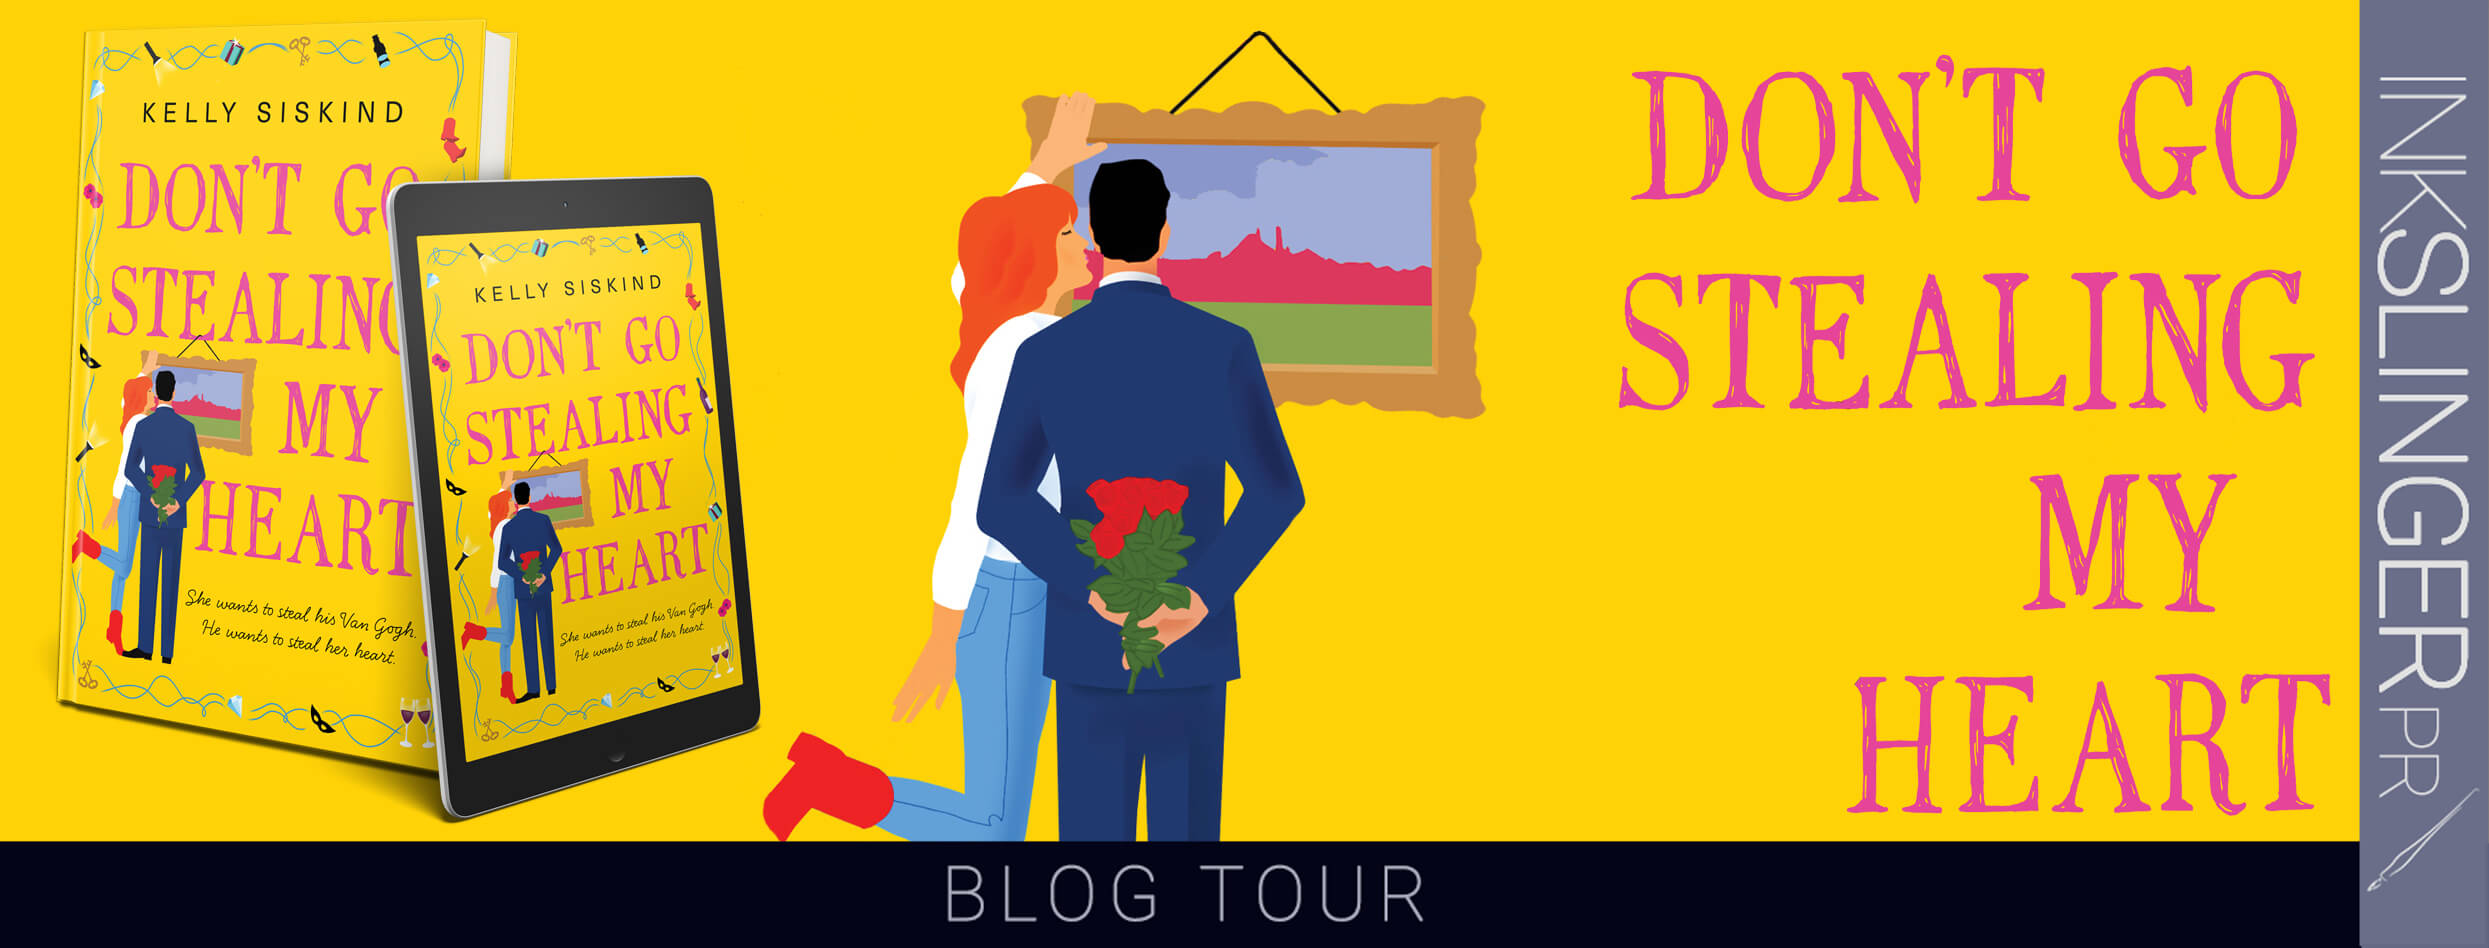 Blog Tour Excerpt: Don't Go Stealing My Heart by Kelly Siskind